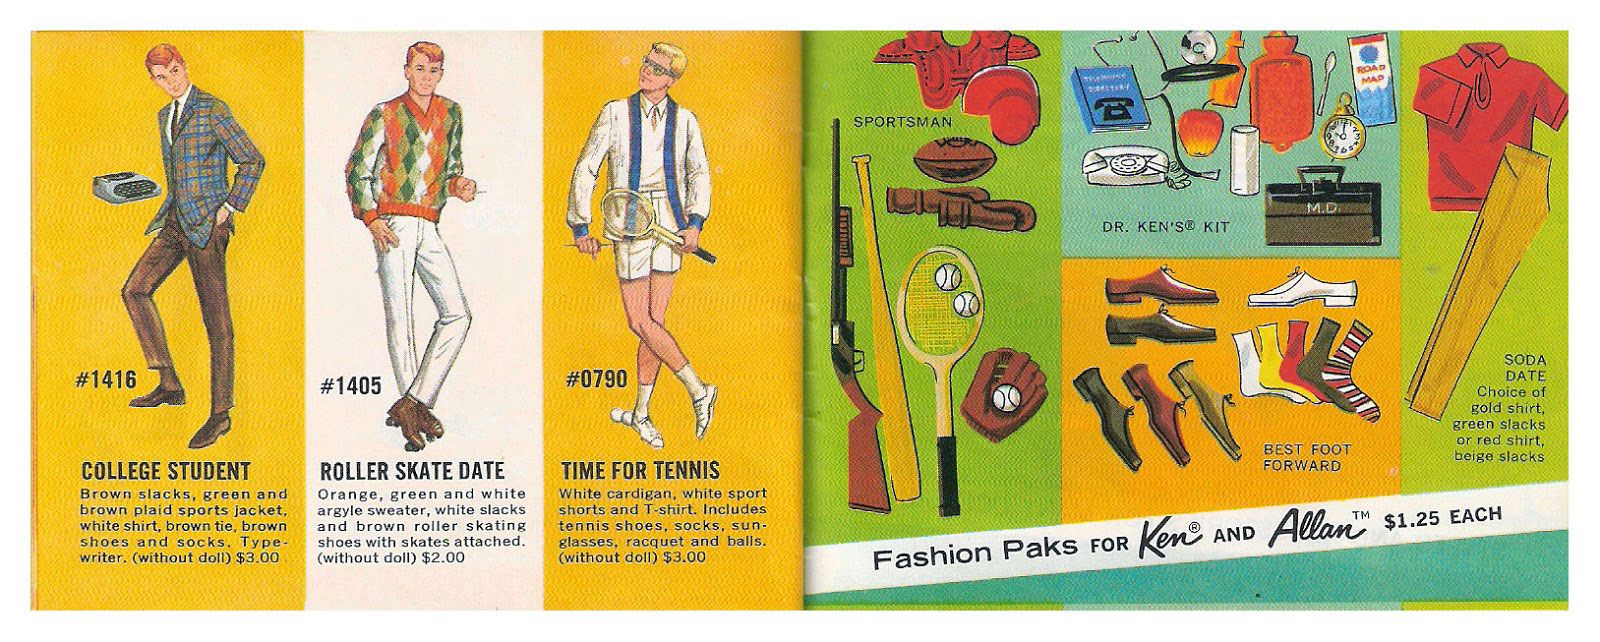 From 1965 Fashion Exclusives book 4